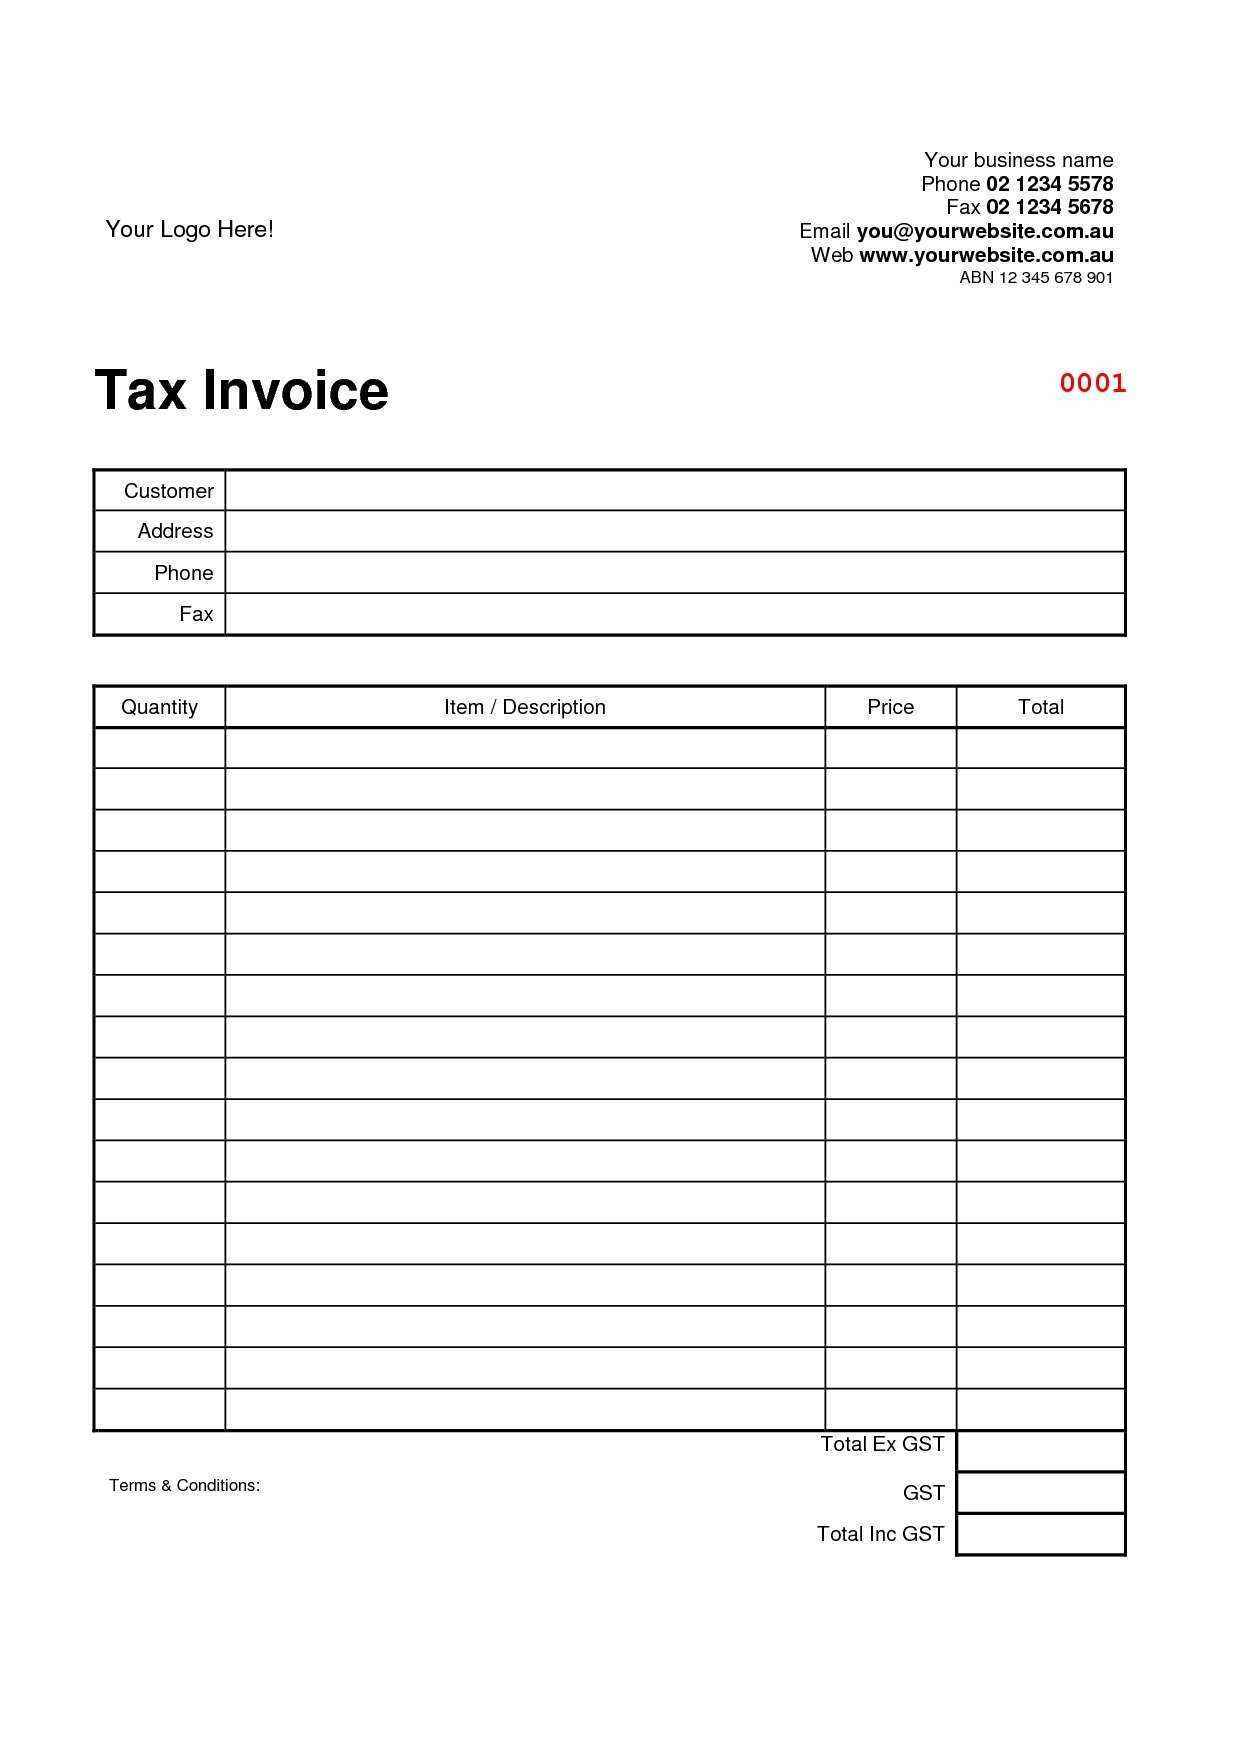 blank-invoice-format-in-excel-excel-templates